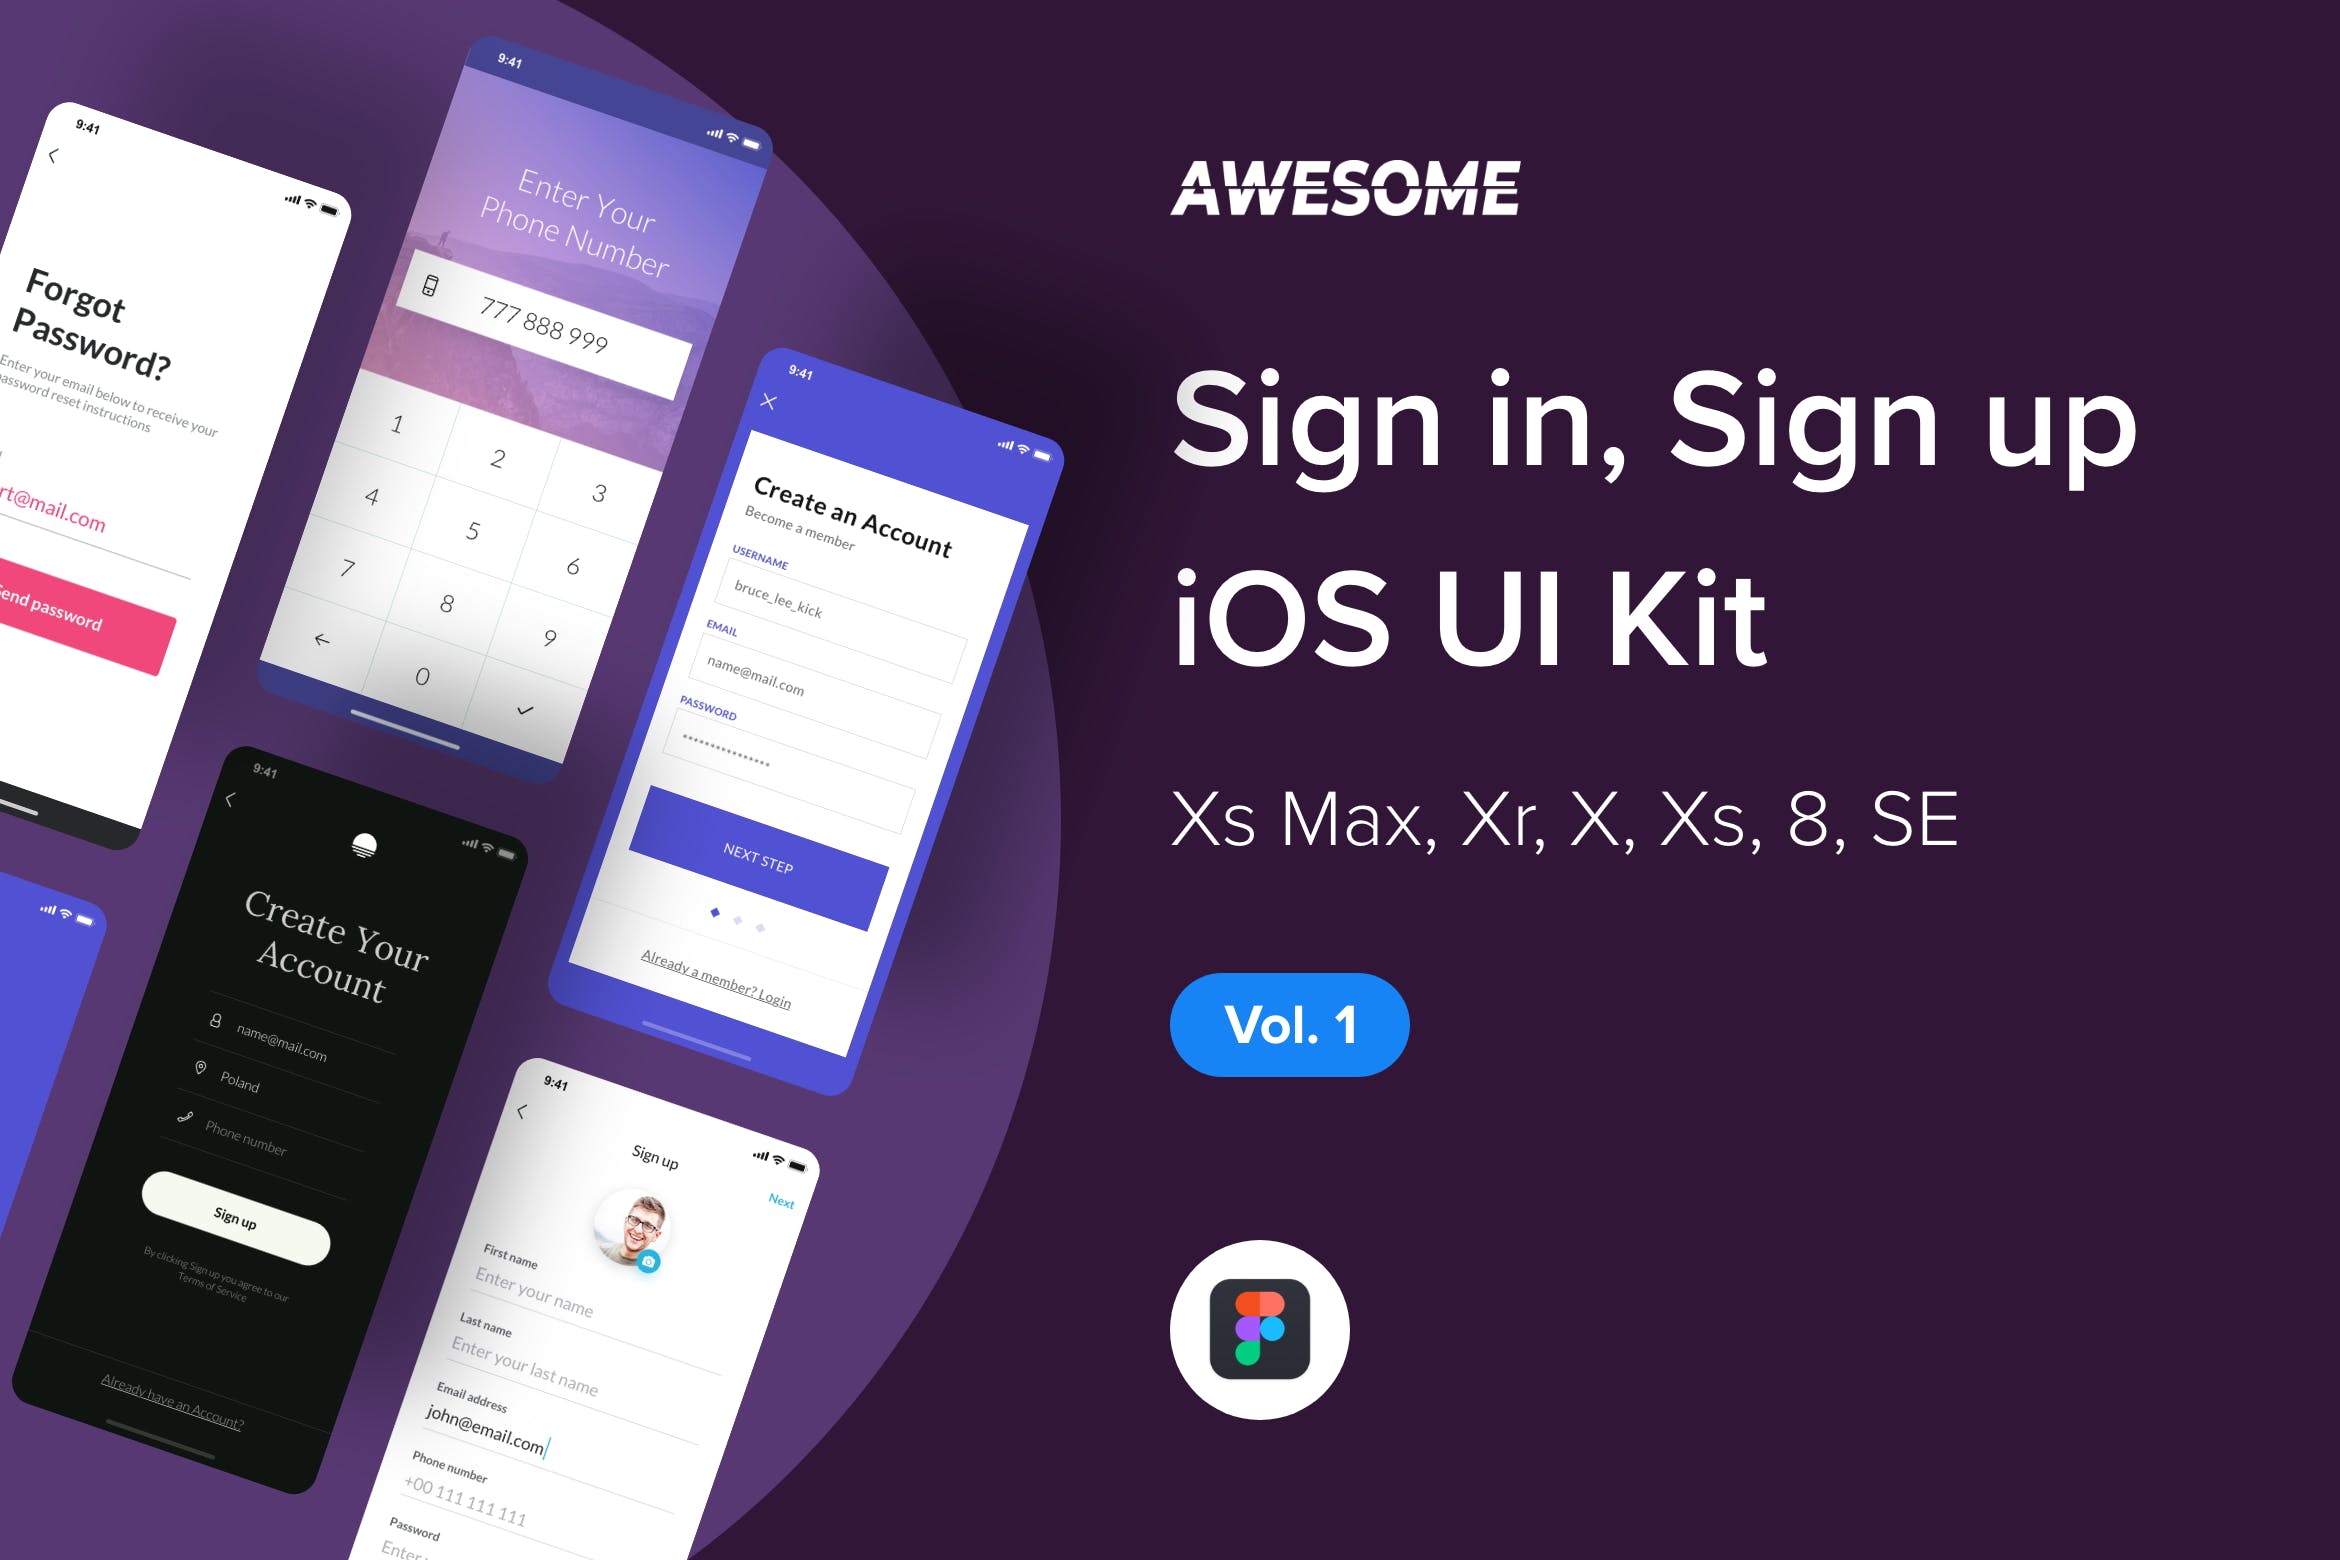 iOS手机应用注册登录界面设计UI套件v1 Awesome iOS UI Kit – Sign in / up Vol. 1 (Figma)插图